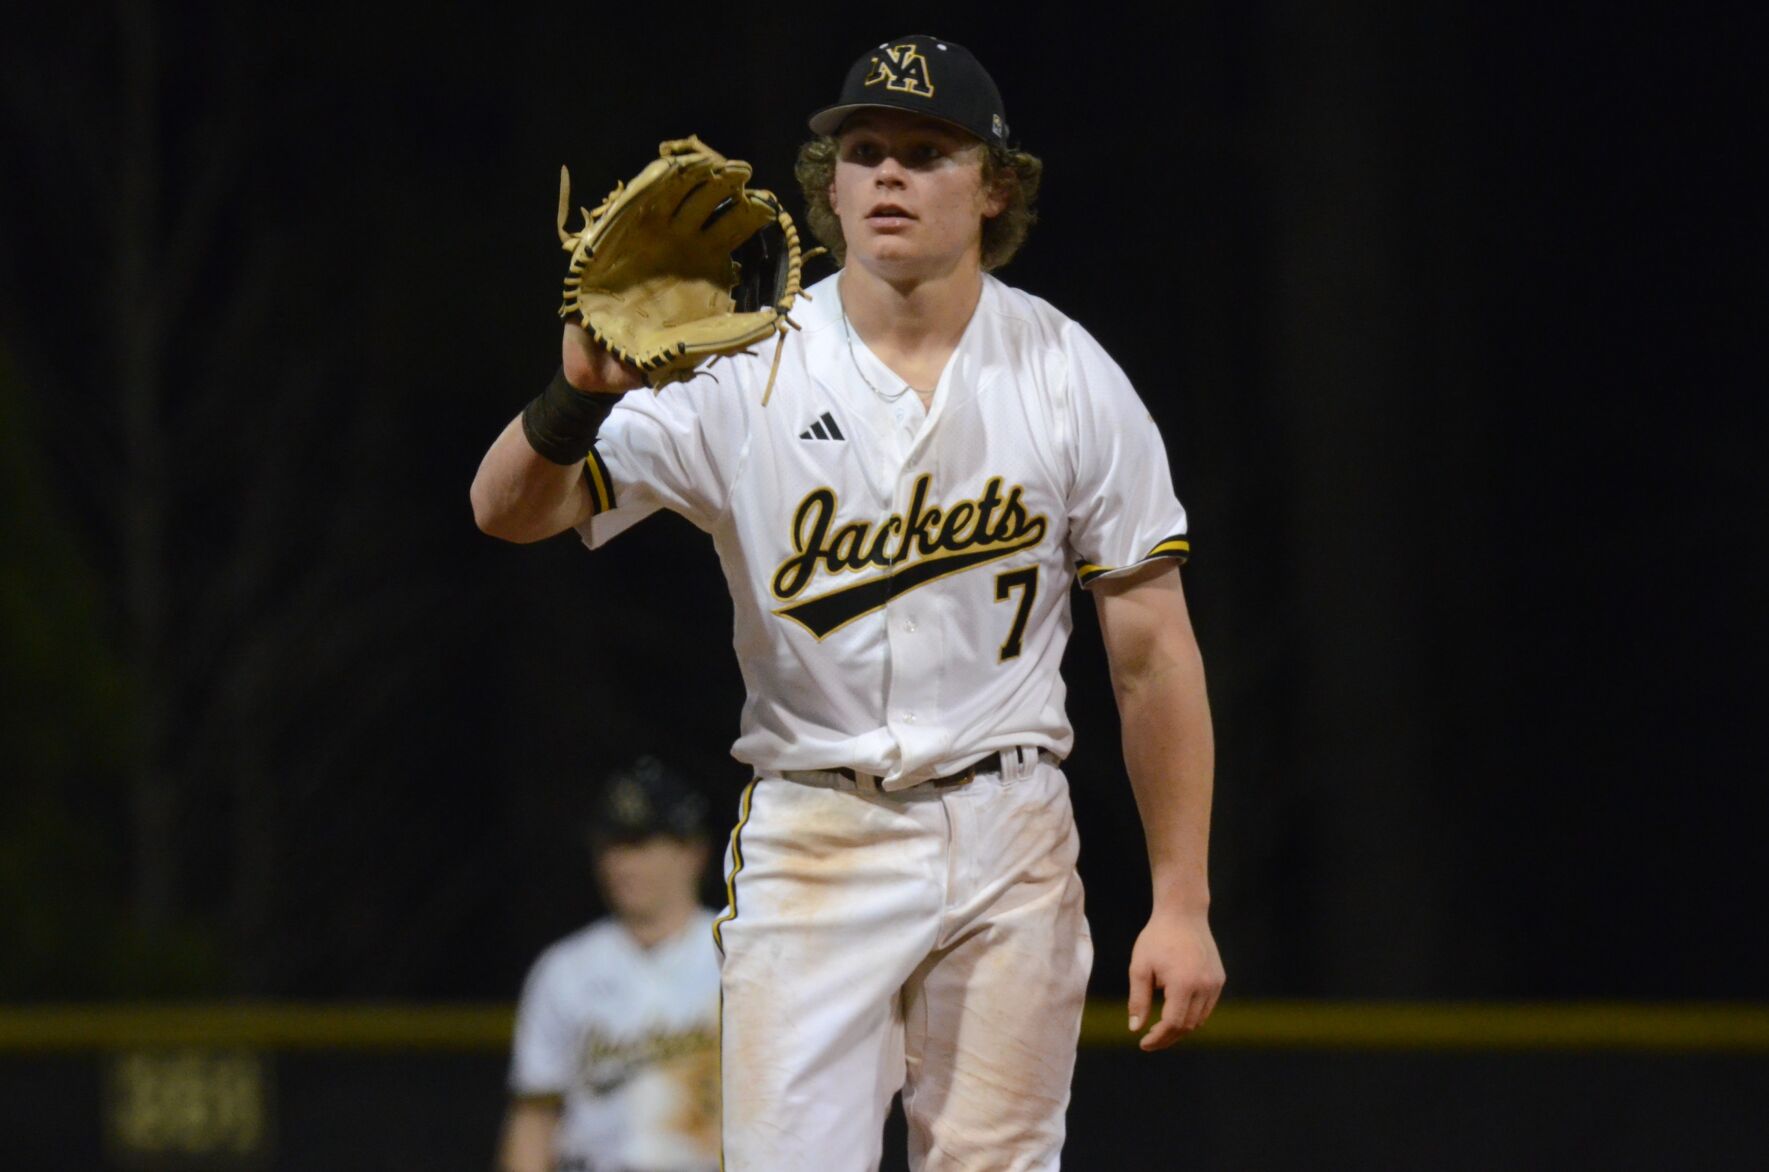 Local Sports: North Augusta Secures Victory Over South Aiken in Home Game on Monday